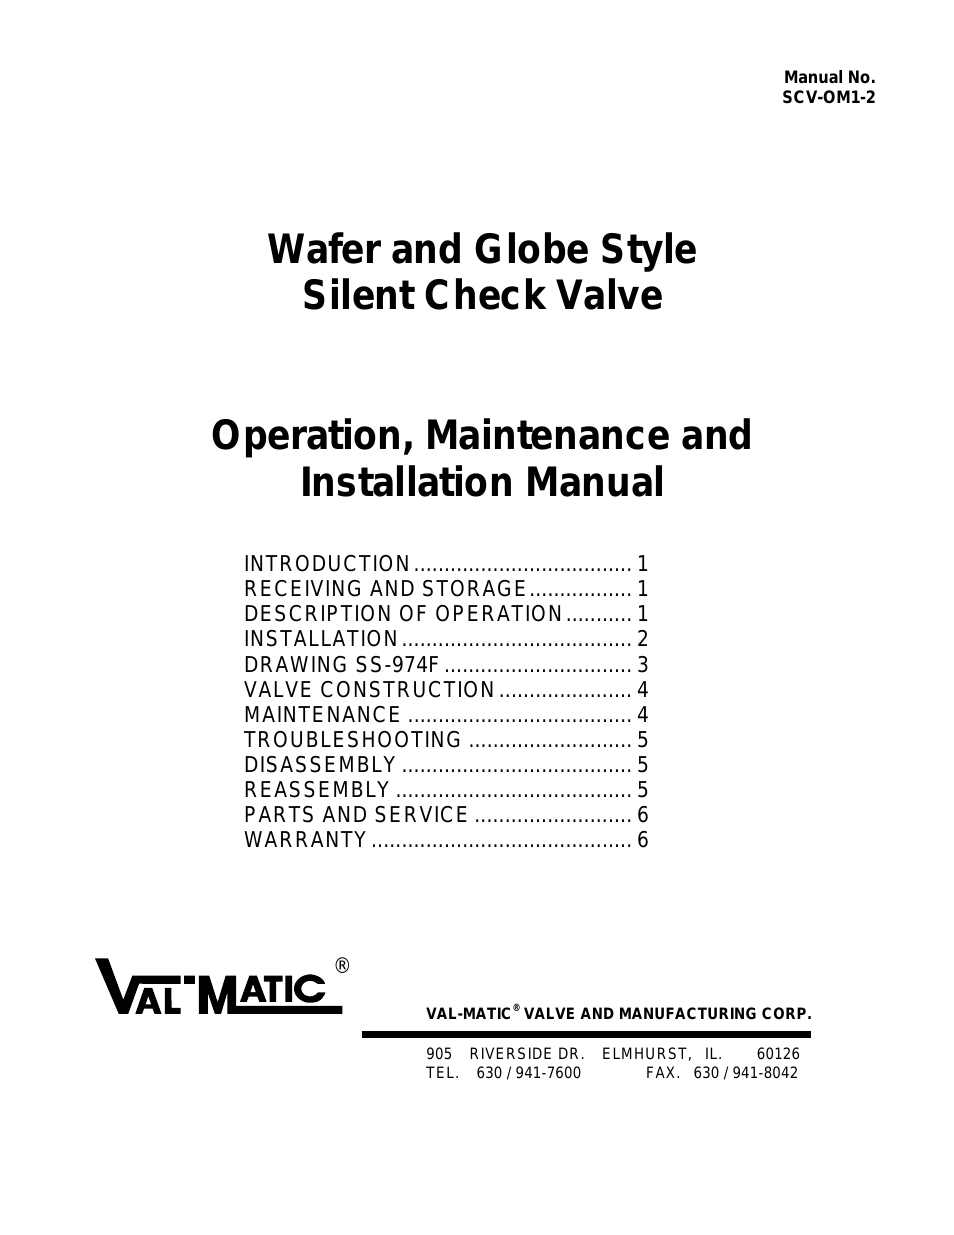 Wafer and Globe Style Silent Check Valve